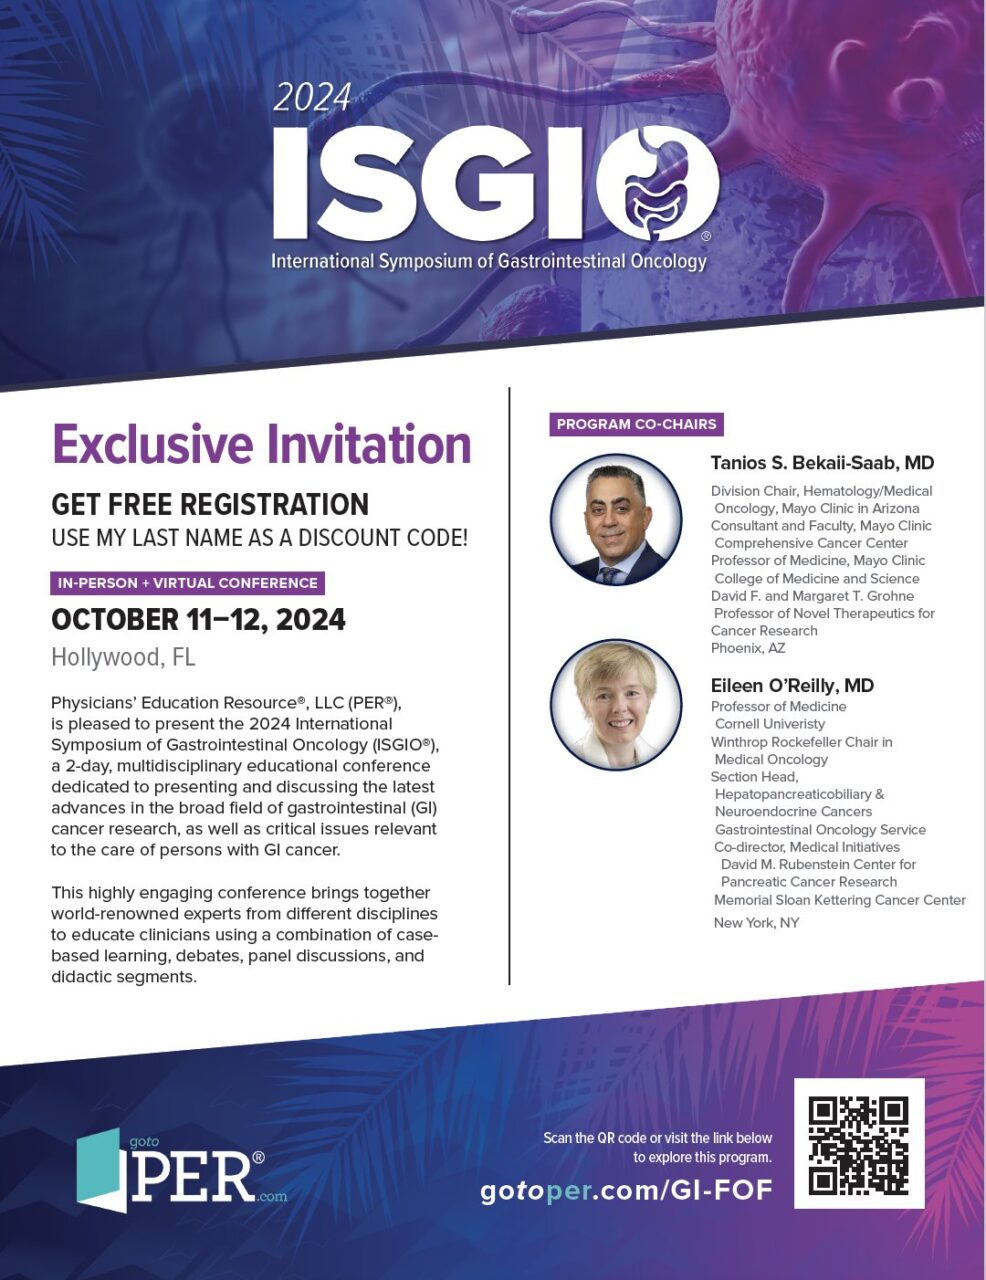 Sharlene Gill: Join us for the International Symposium of Gastrointestinal Oncology